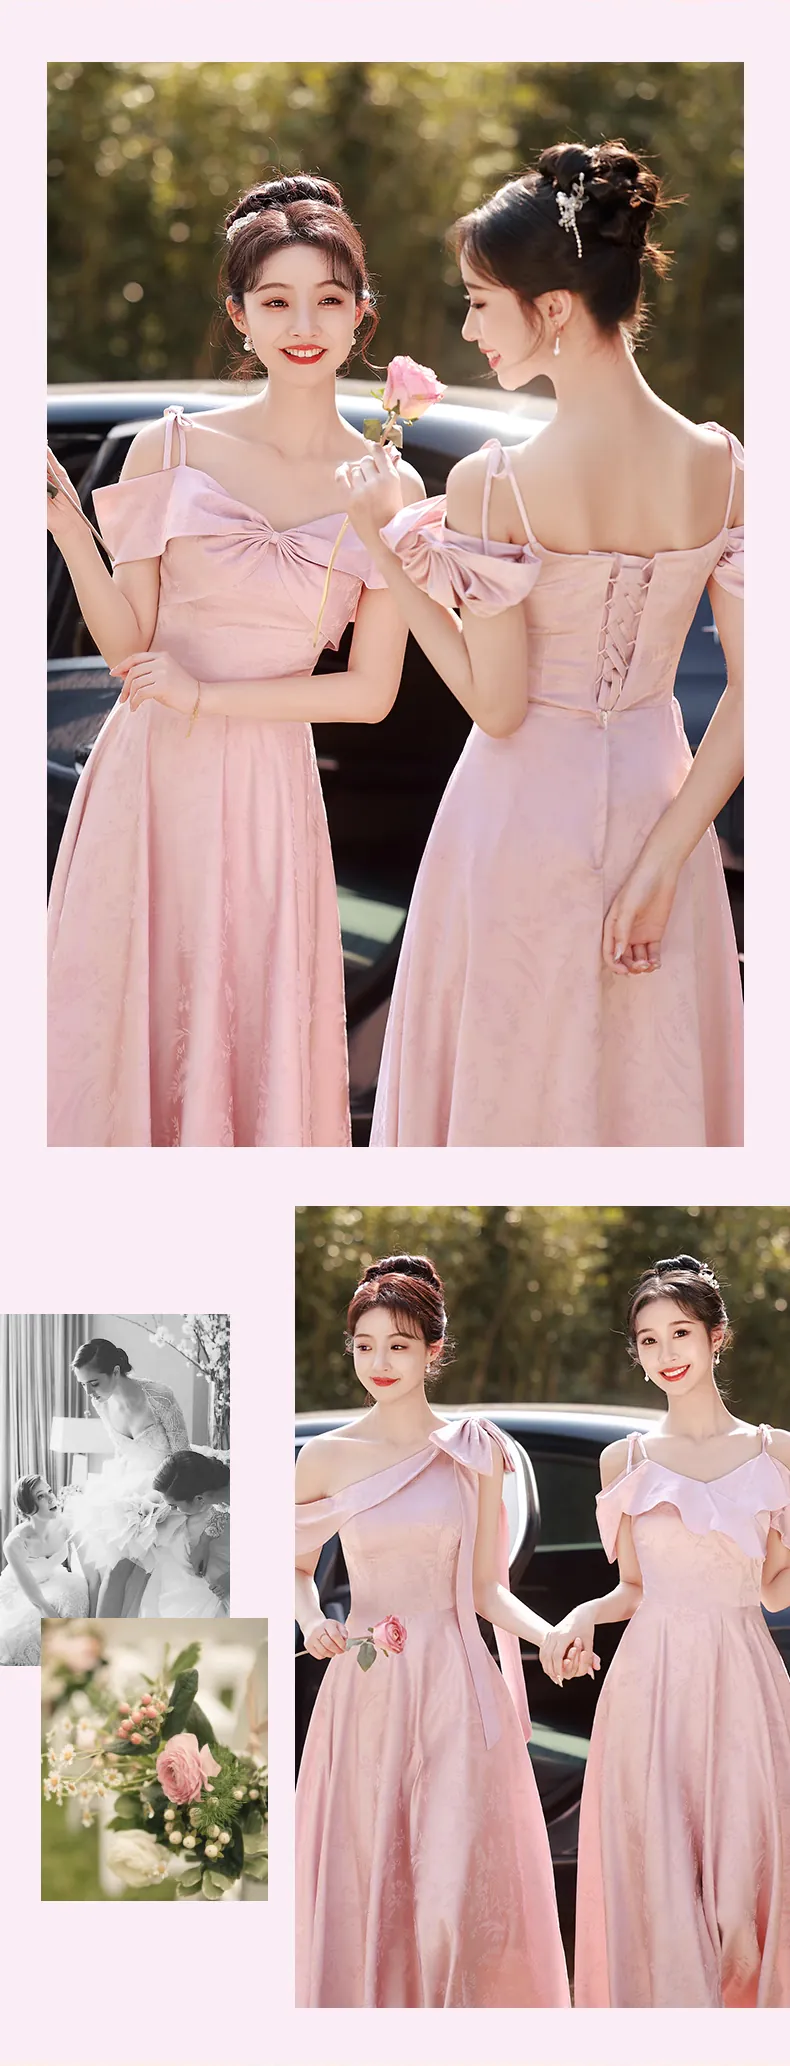 Sweet-Pink-Jacquard-Bridesmaid-Dress-Wedding-Party-Formal-Gown16